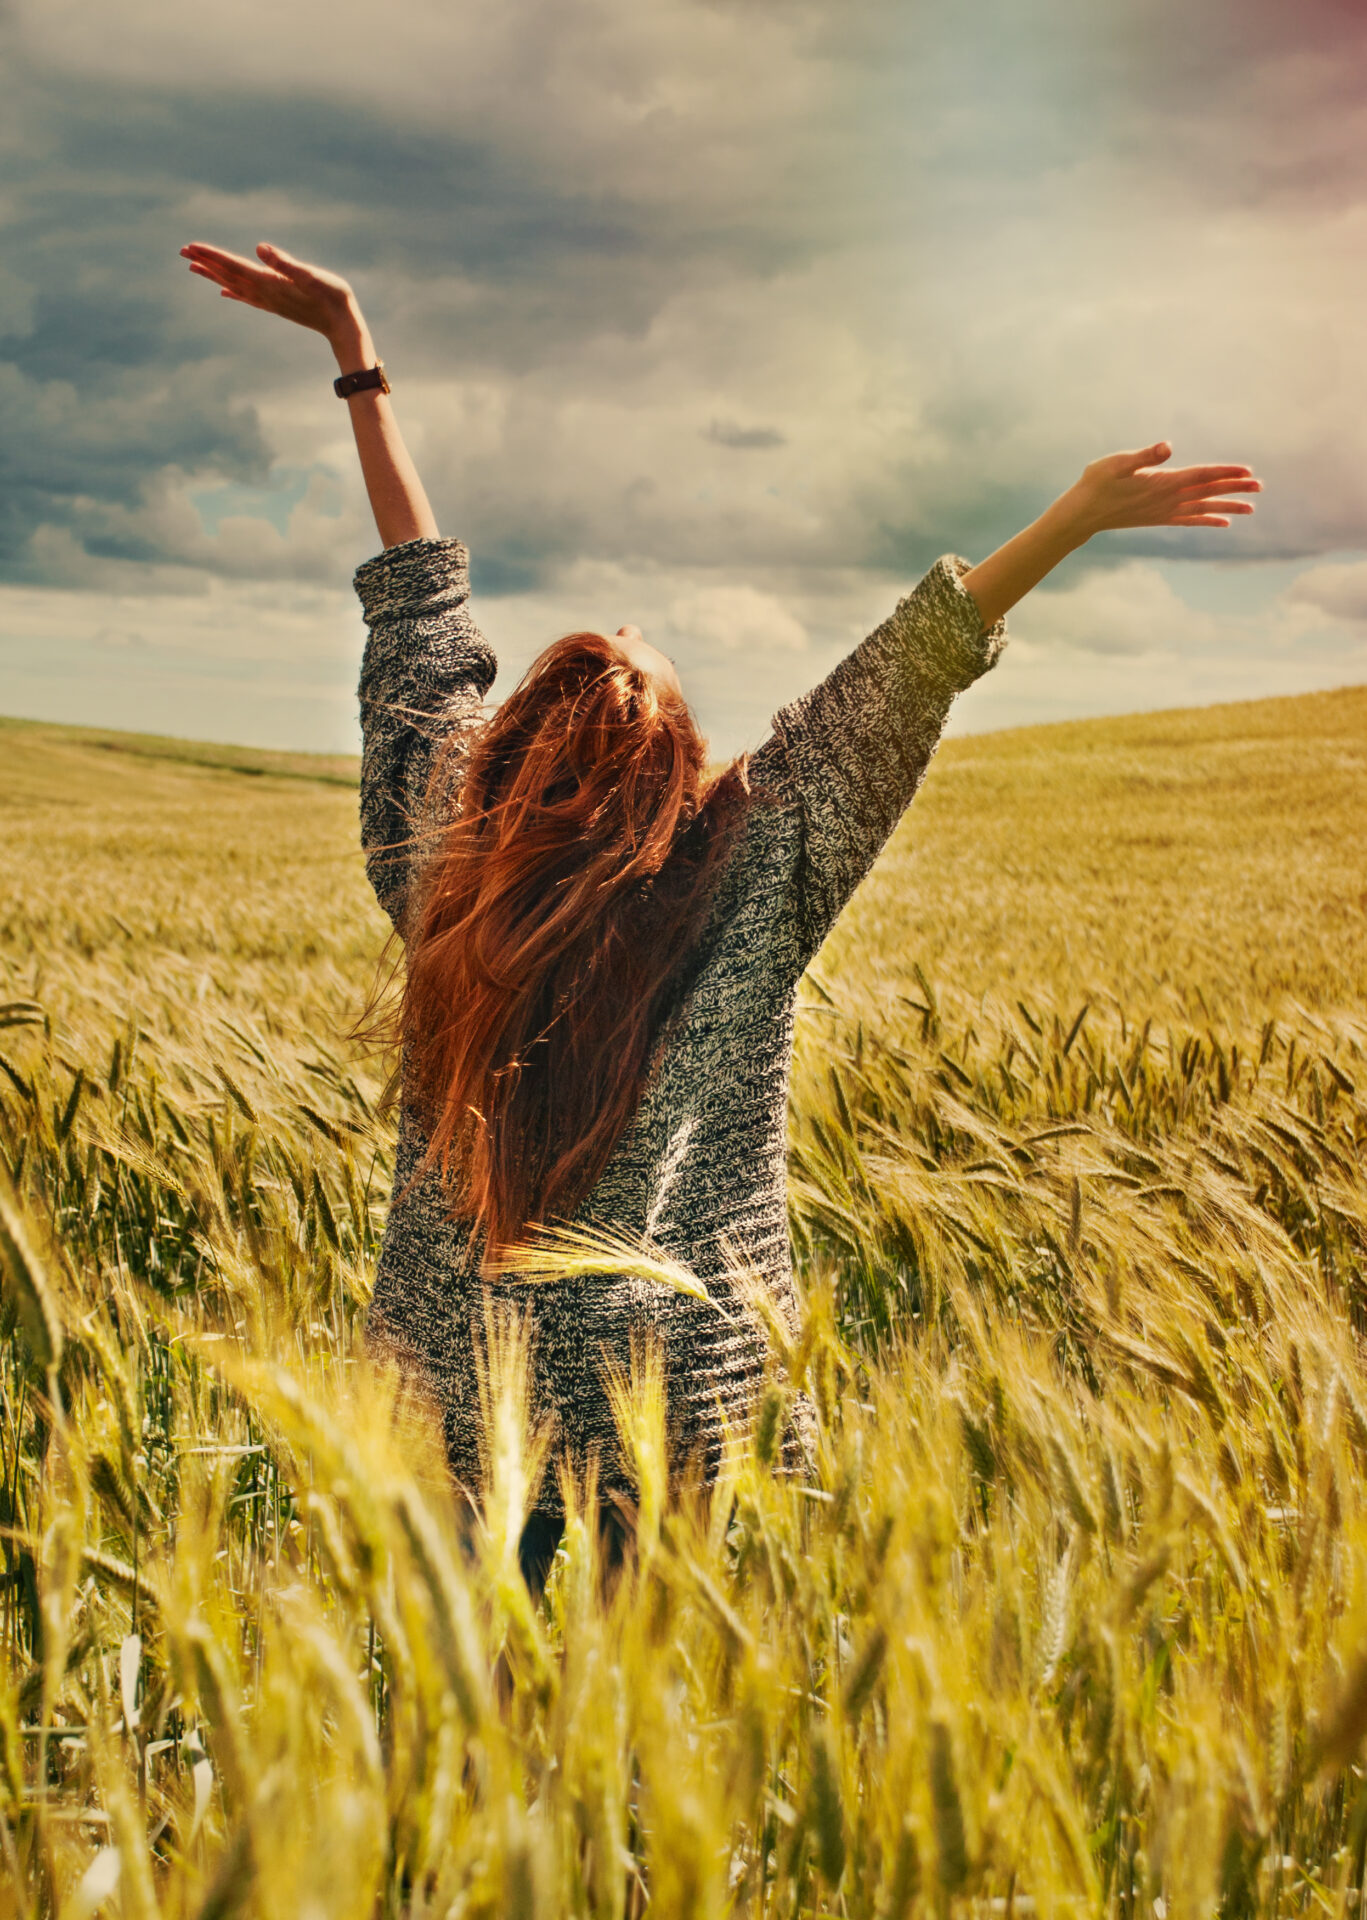 fashion young red hair woman standing back hands up on breathtaking view of dramatic storm sky in the field